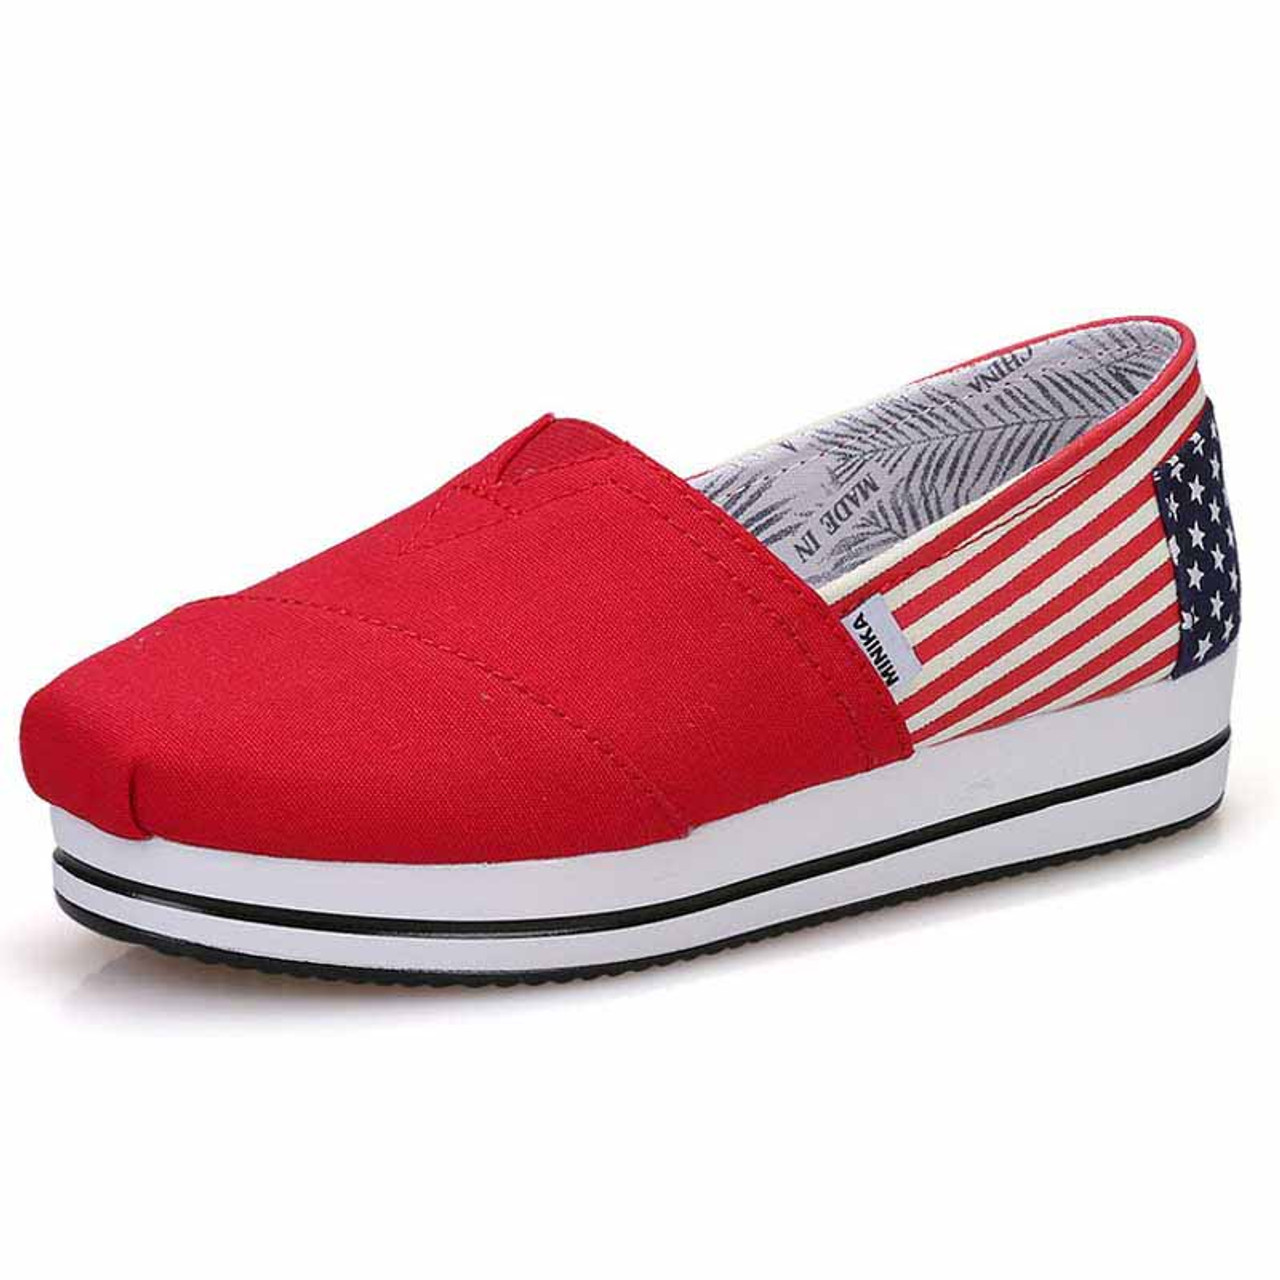 Red flag pattern canvas slip on 